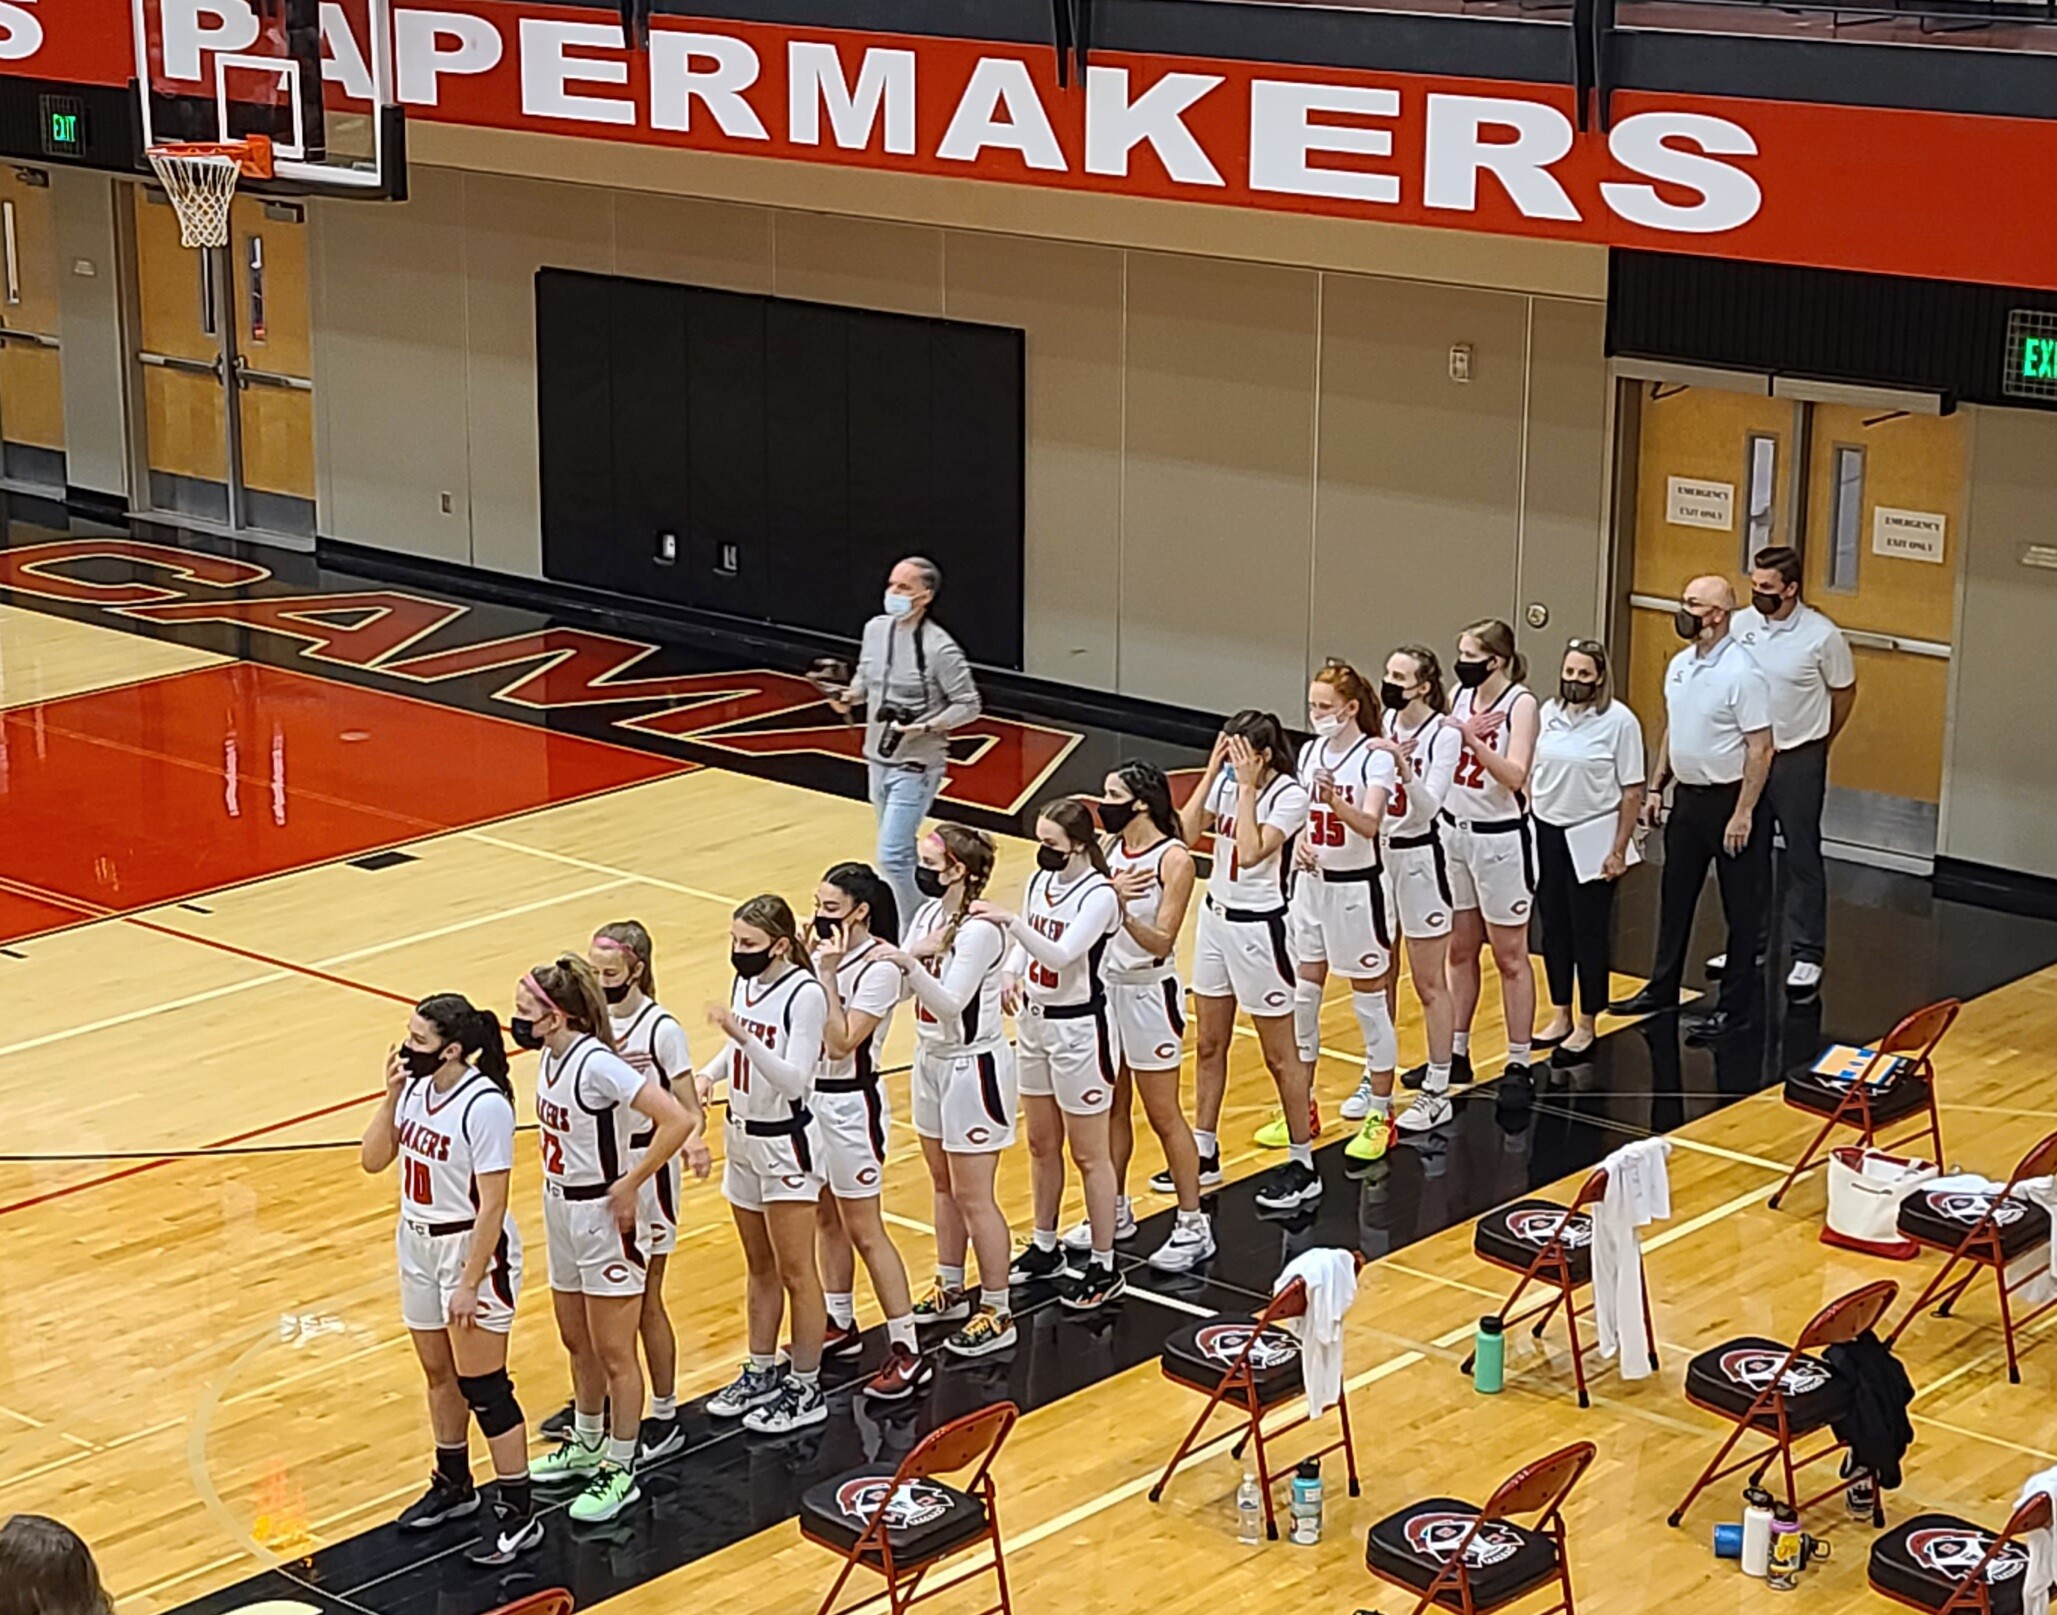 The Camas girls basketball team is made up of talented players from all classes, from seniors to freshmen. The team uses that wave of talent to overwhelm opponents this season. And the expectations are rising for the future of the program. Photo by Paul Valencia